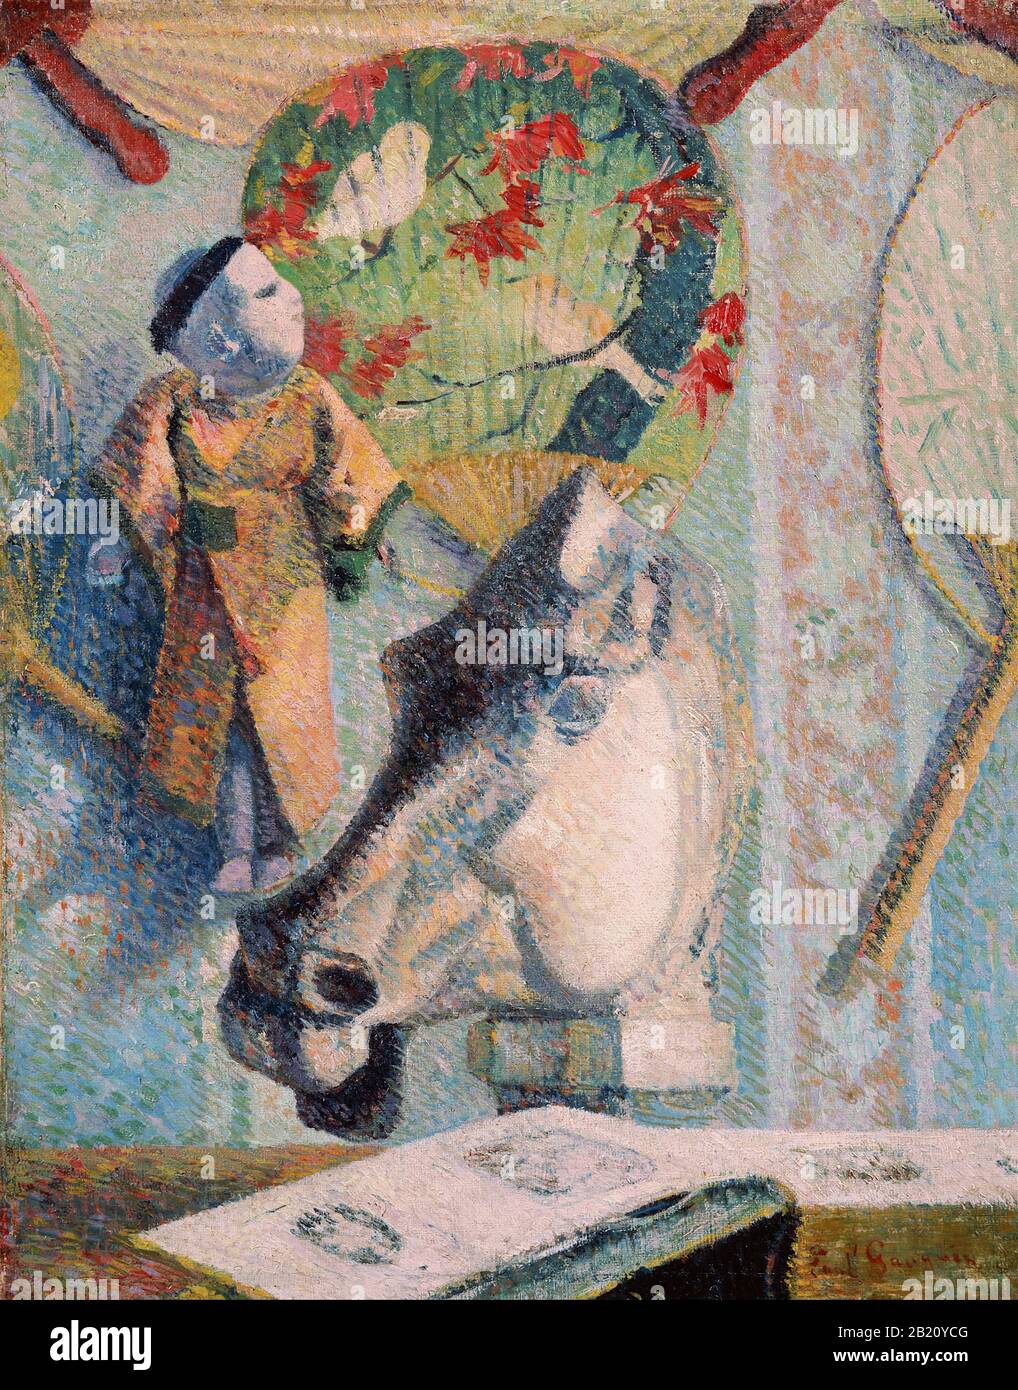 Still Life with Horse's Head (Nature morte la tte de cheval) (1886) 19th Century Painting by Paul Gauguin - Very high resolution and quality image Stock Photo